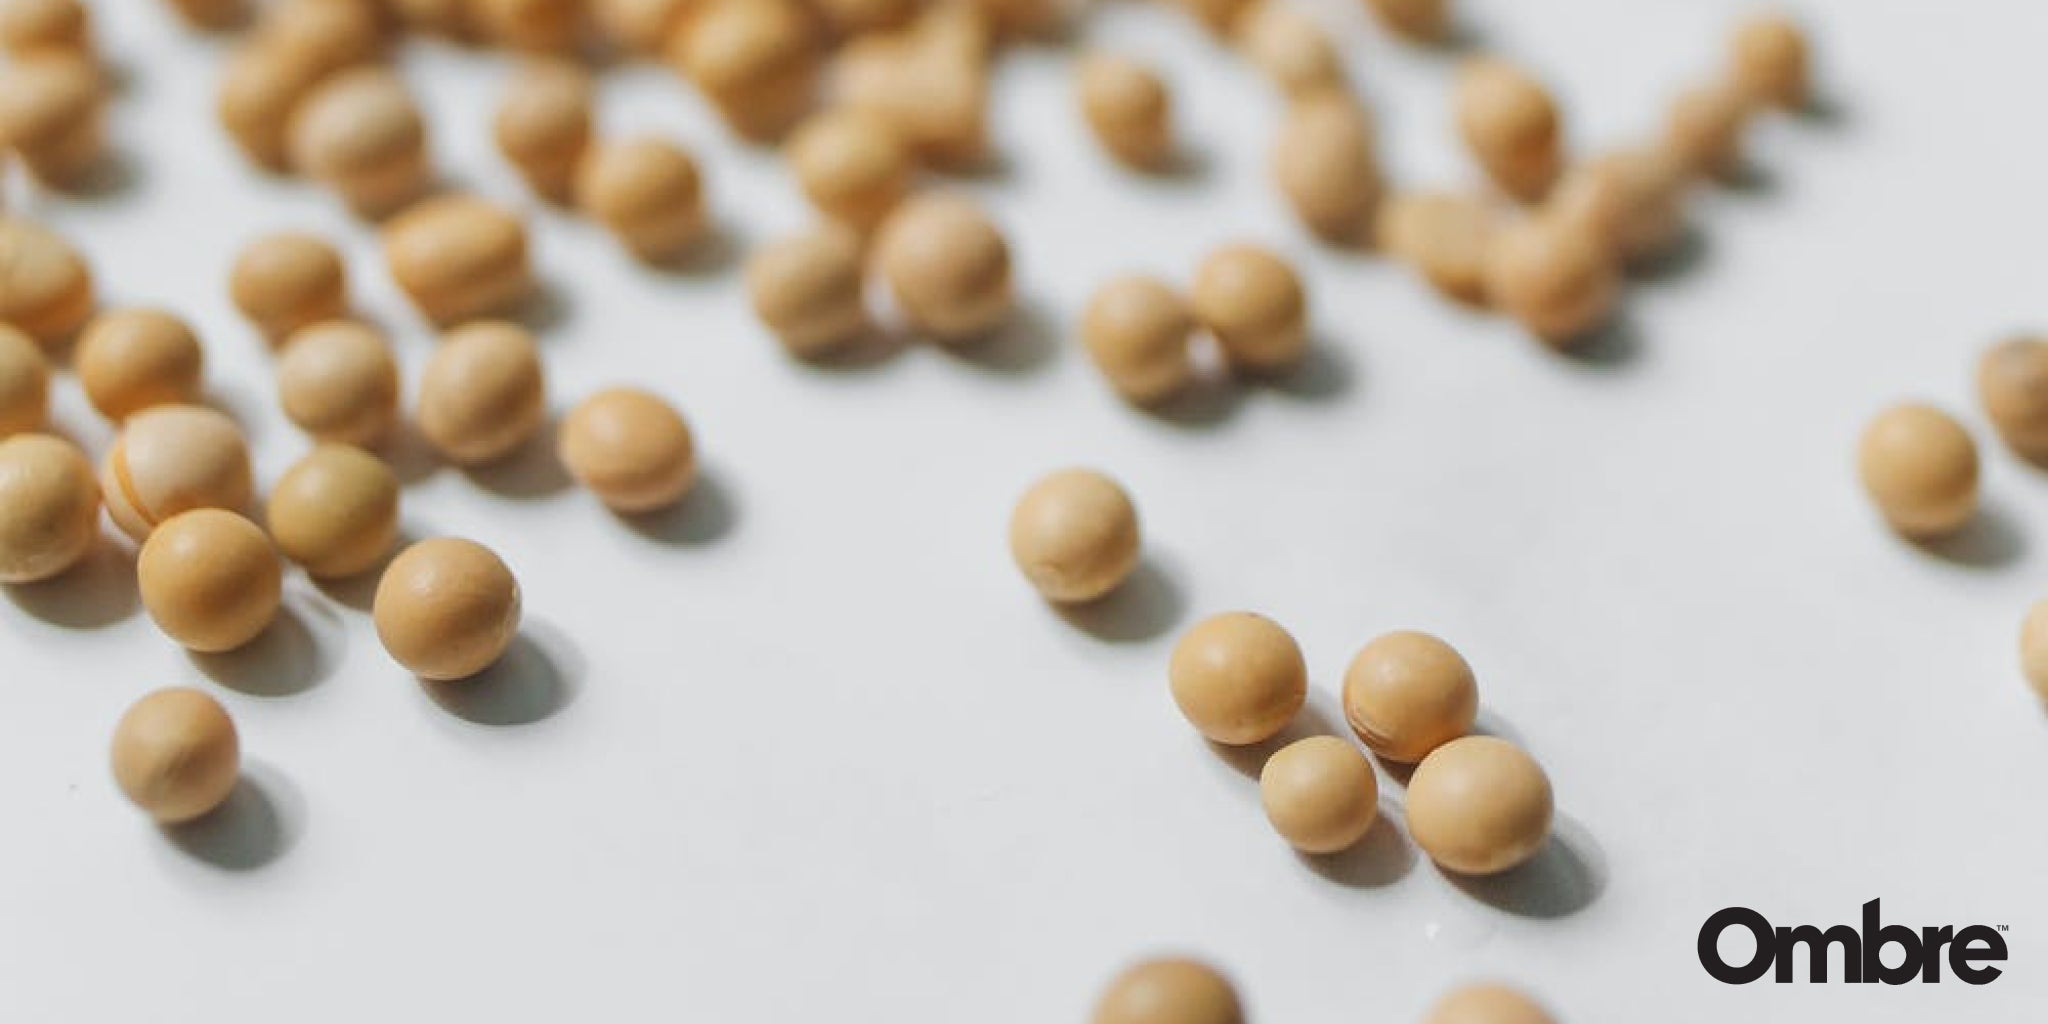 Soy: The Good and Bad About the Effects of Soy